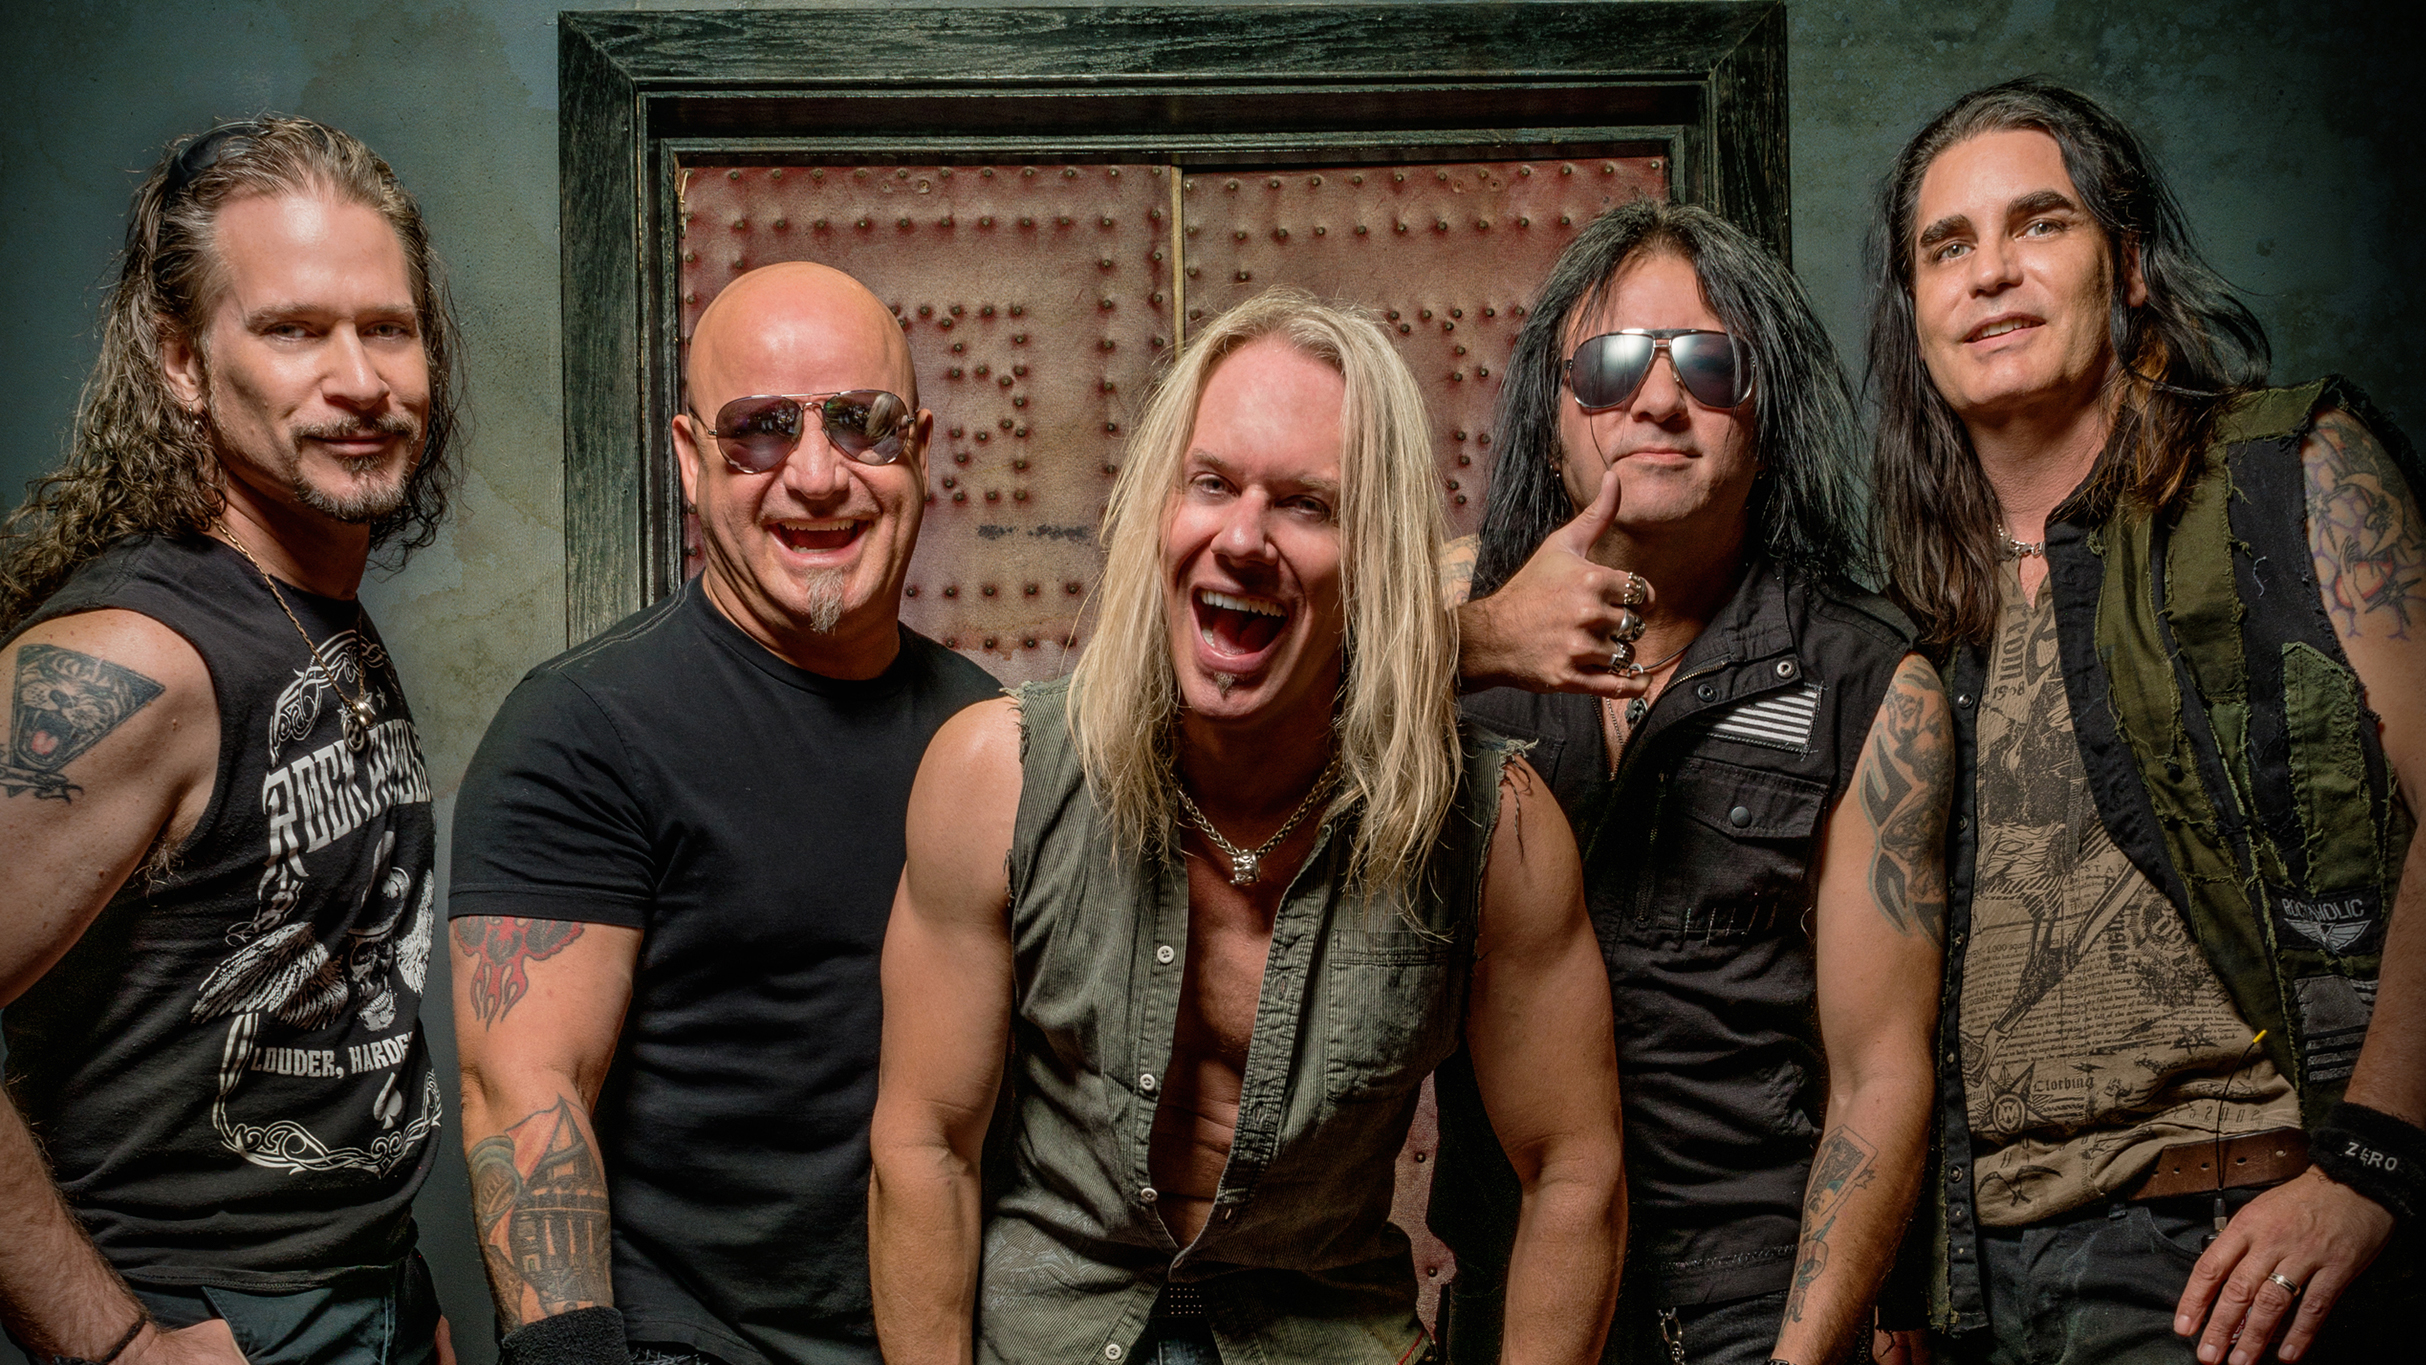 Warrant with Lita Ford and Nelson 